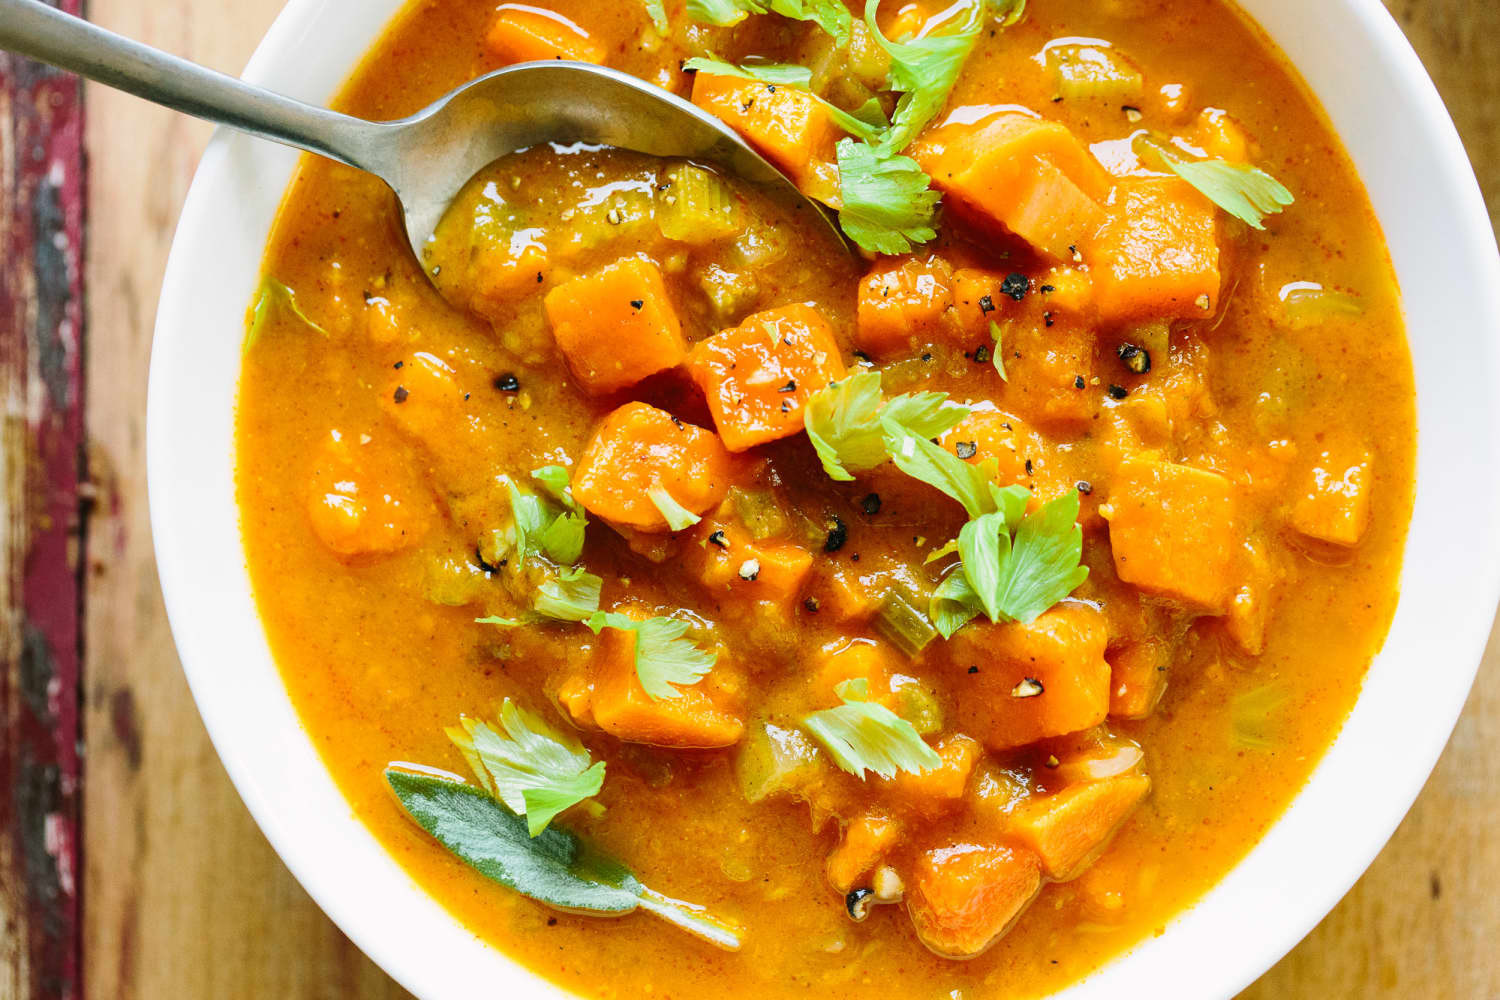 Yummy Vegetarian Recipes
 20 of the Most Delicious Vegan Recipes We Know